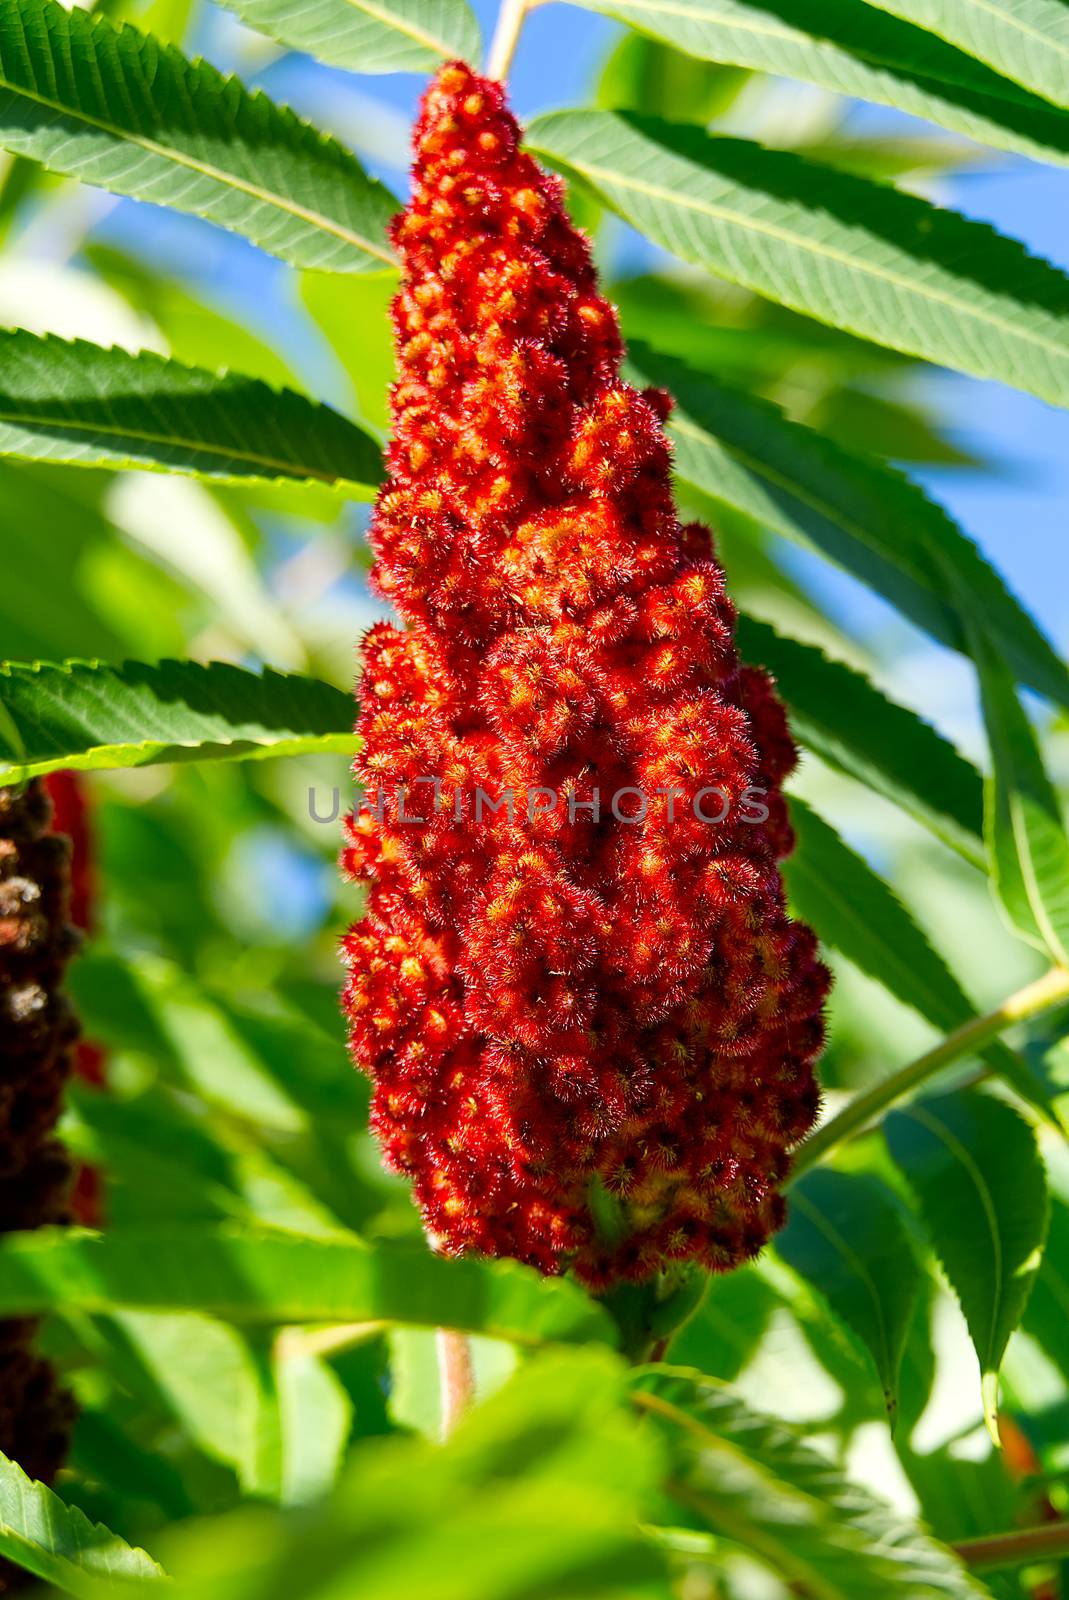 Red blossom of Blooming sumac vinegar tree, Rhus typhina, close-up in sunny summer day